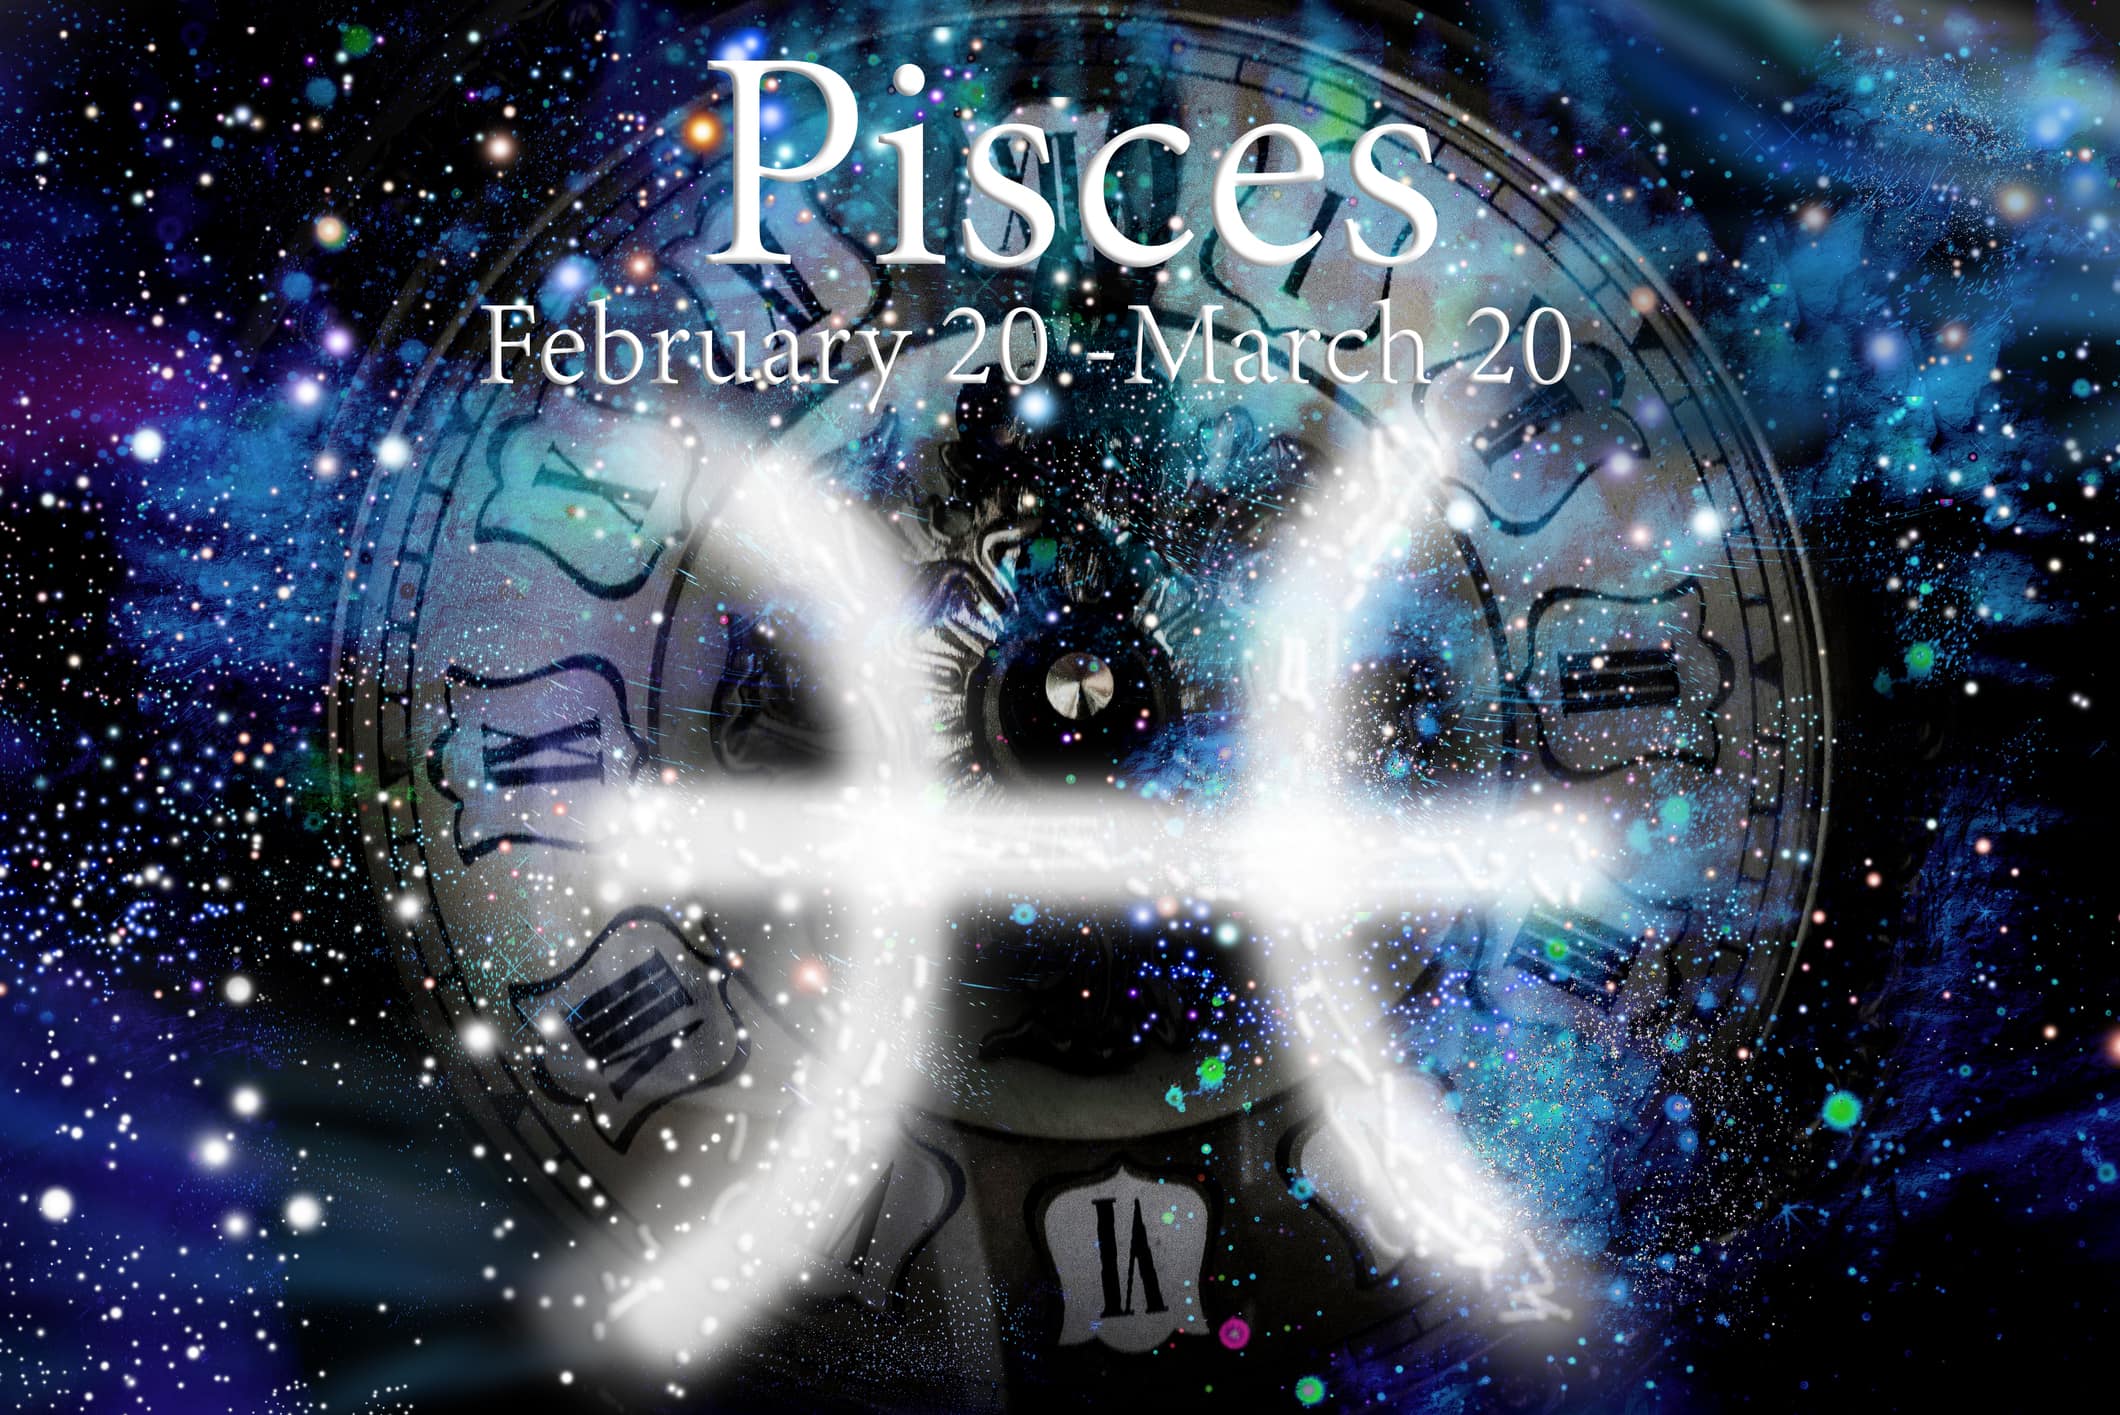 Winter astrological zodiac symbol of the Pisces